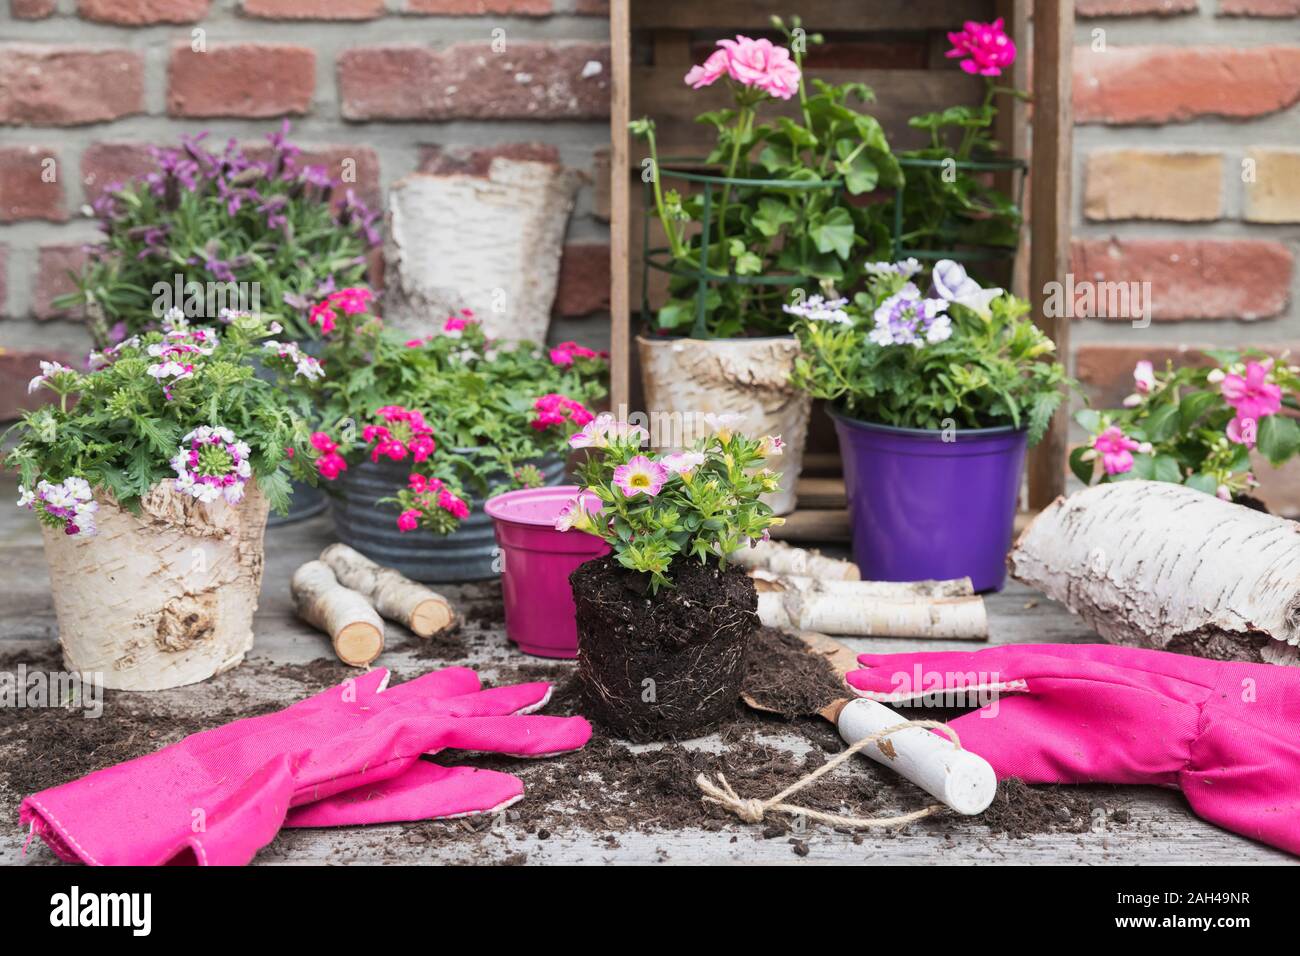 Flowers in pots and gardening gloves Stock Photo